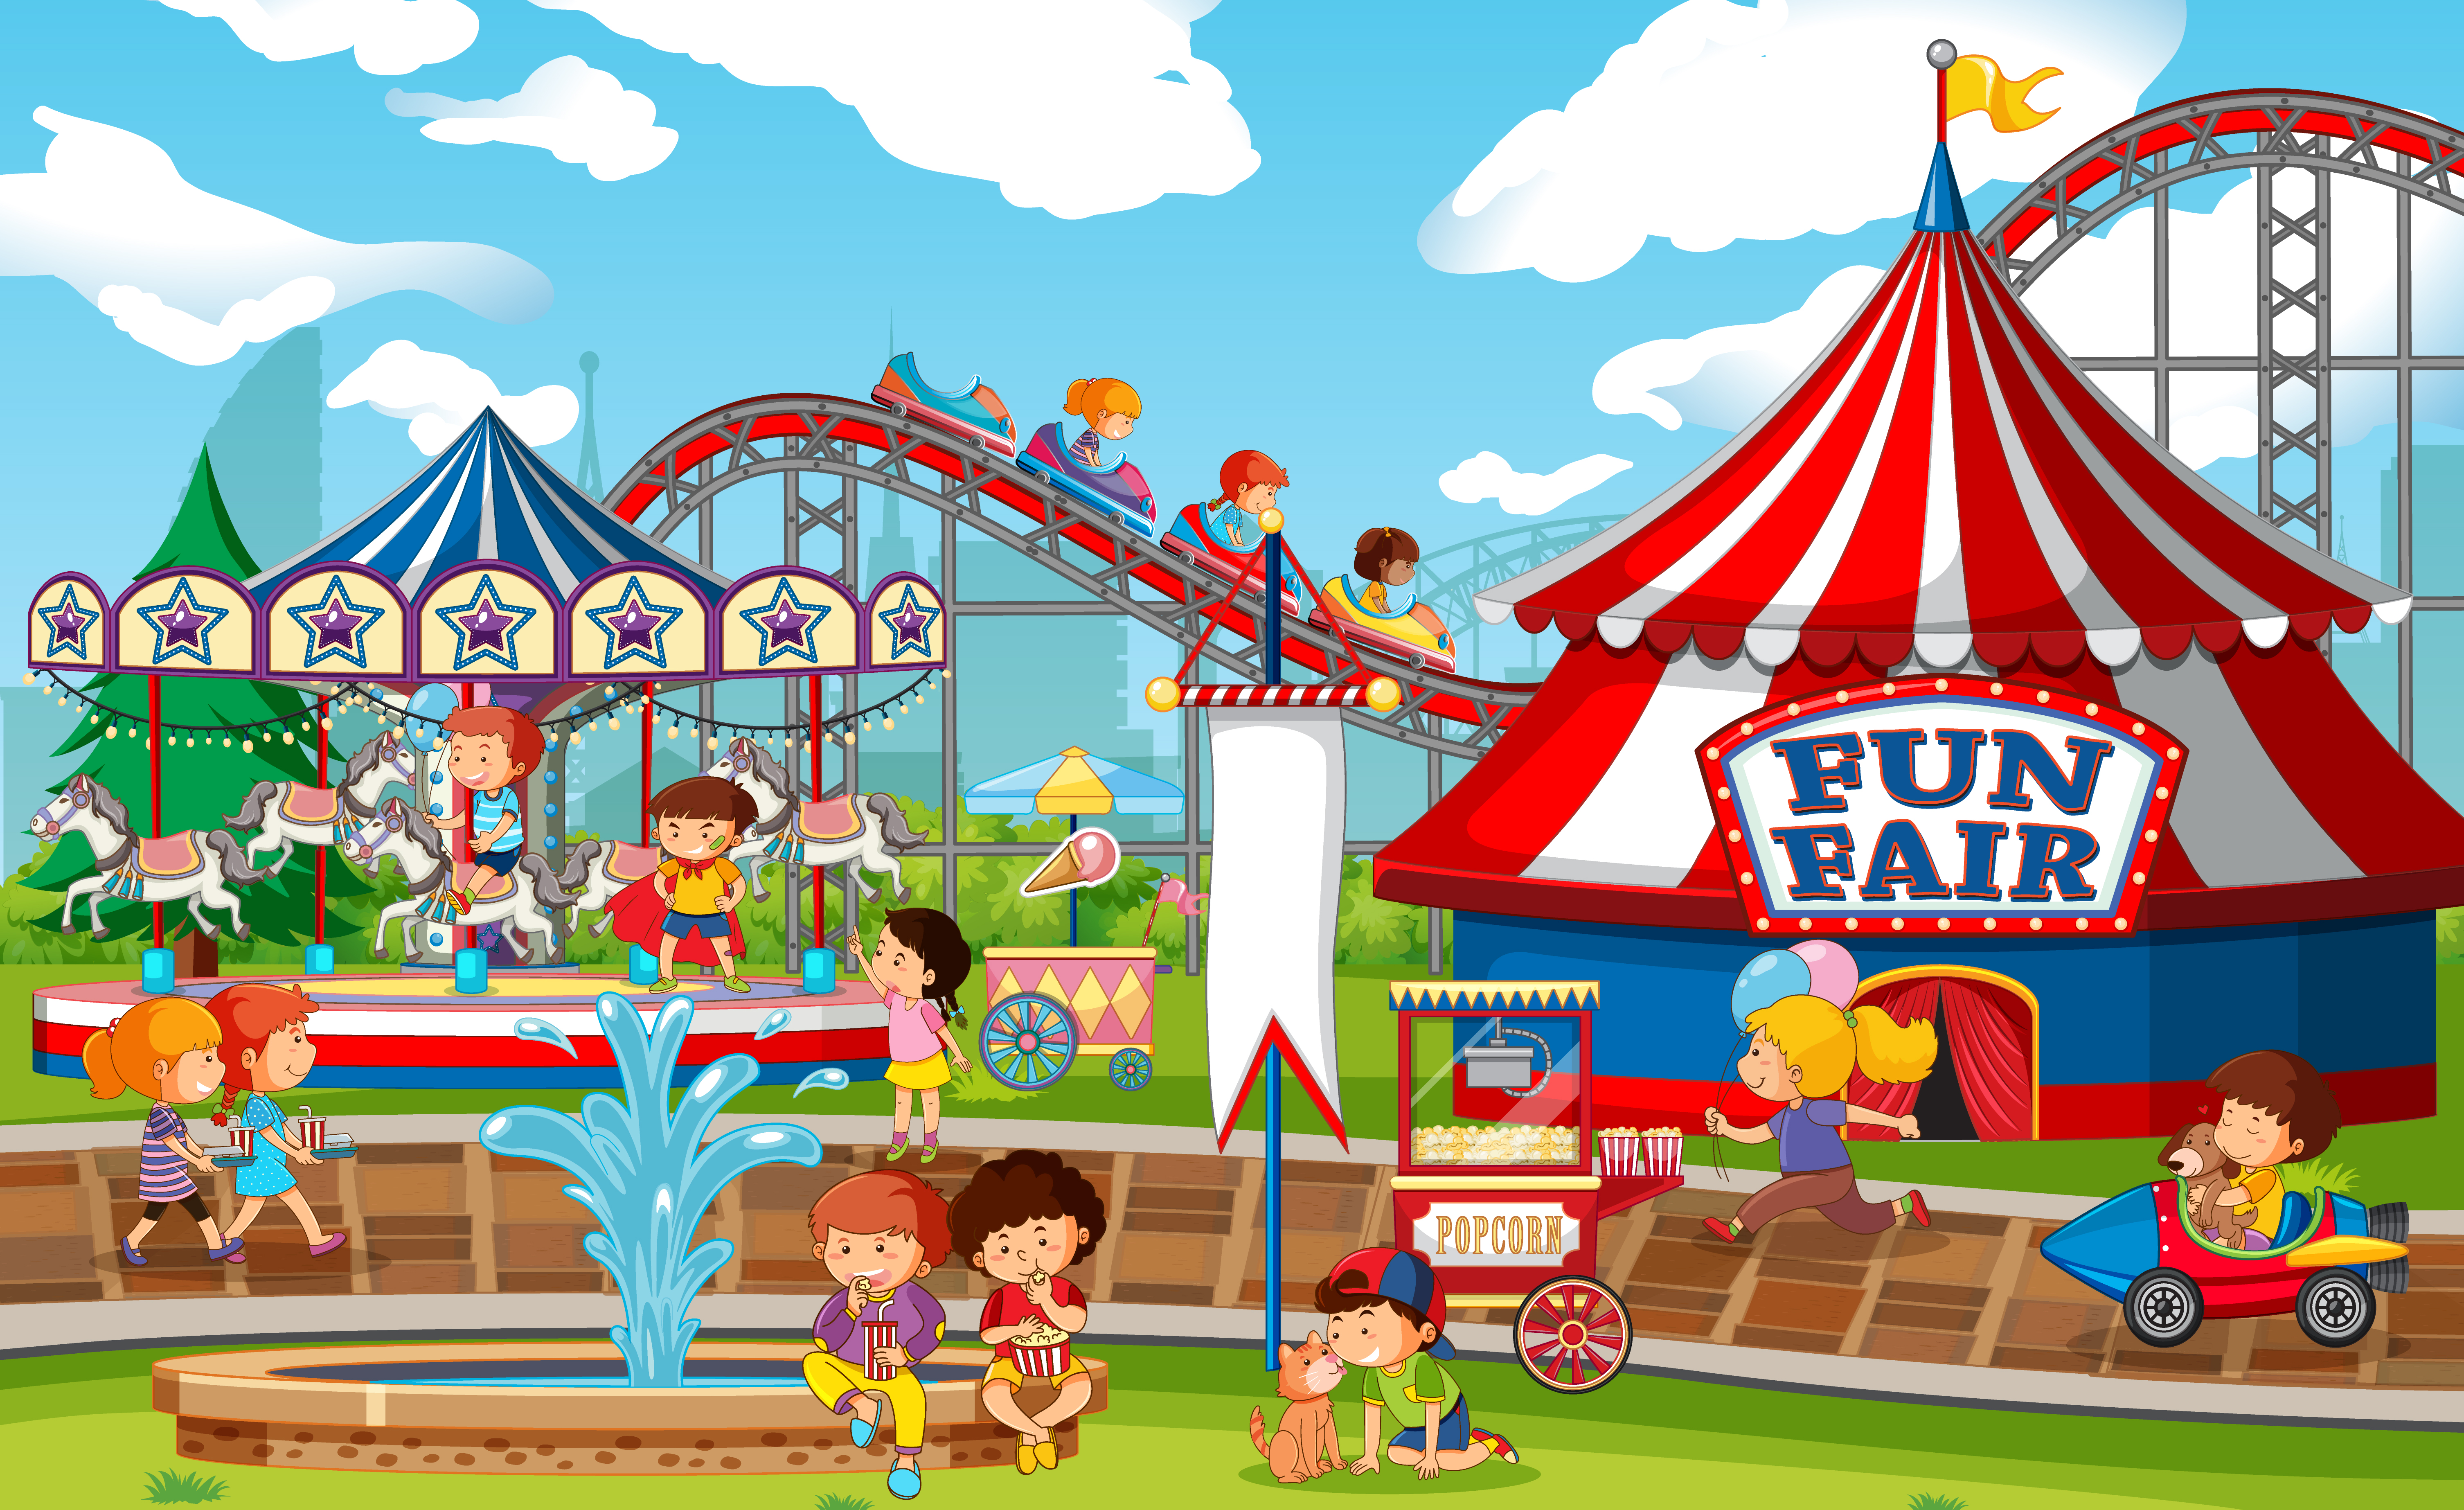 join with funfair.jpg